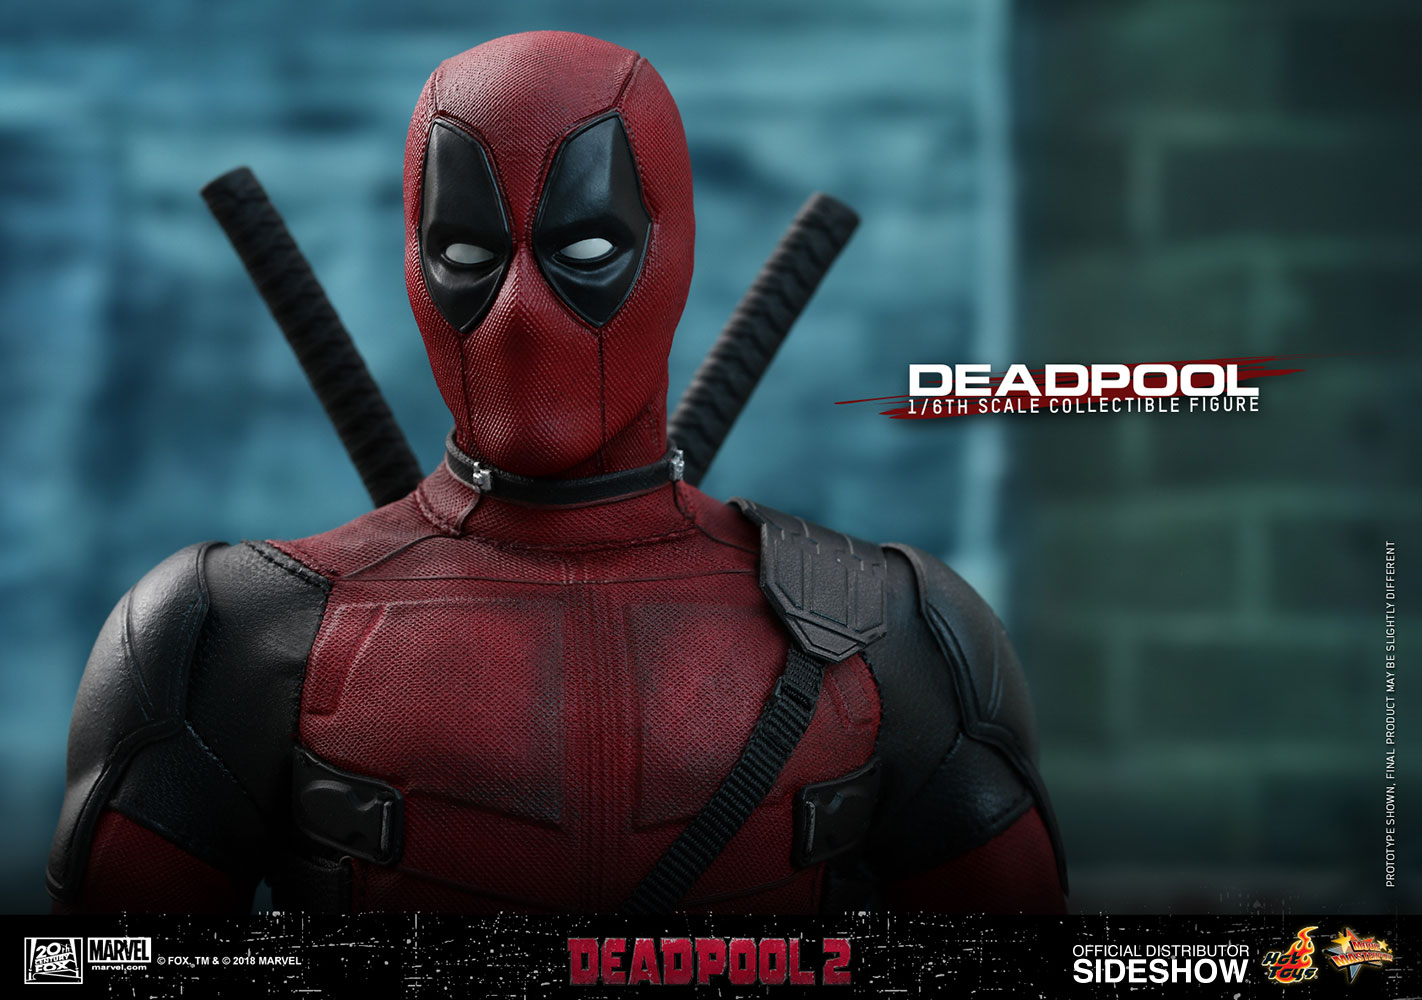 Hot Toys Deadpool 1/6th scale Collectible Movie Figure Images